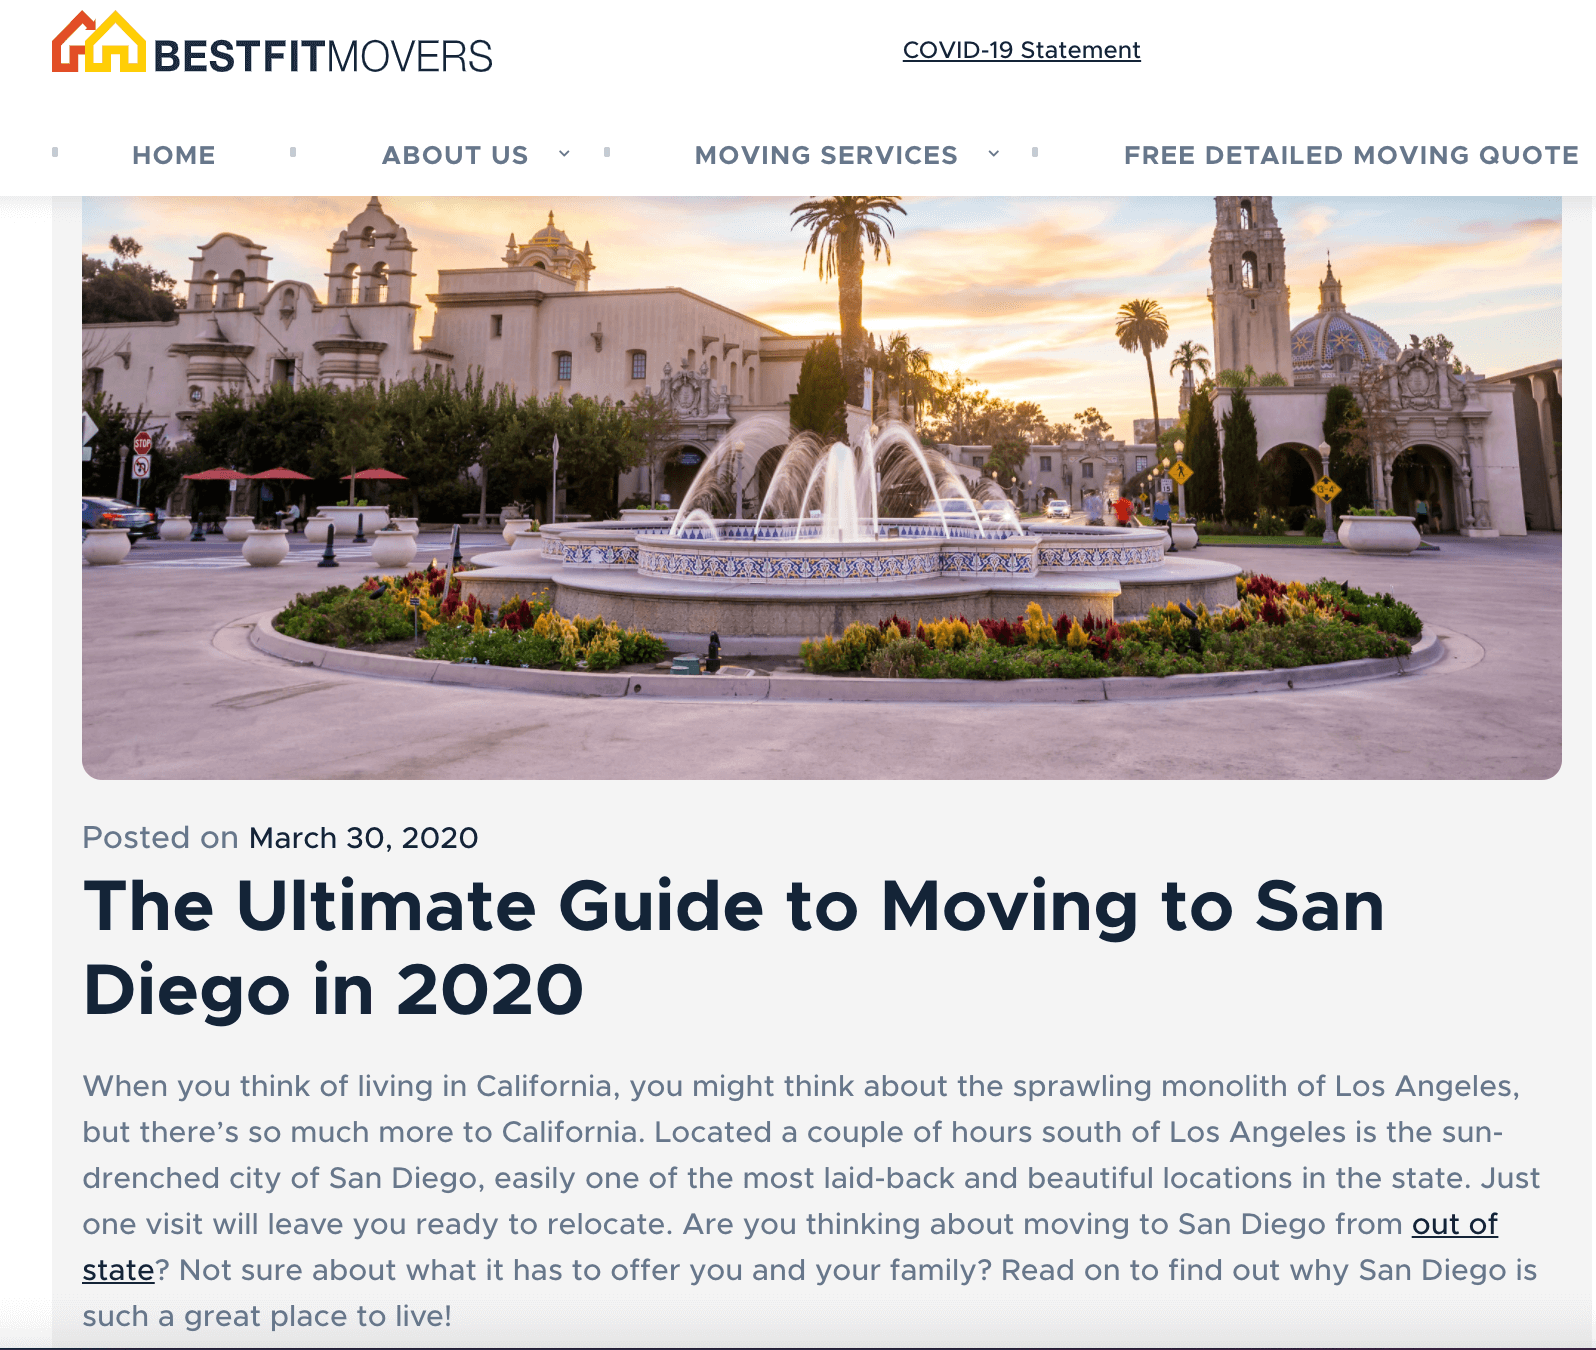 The Ultimate Guide to Moving to San Diego in 2020